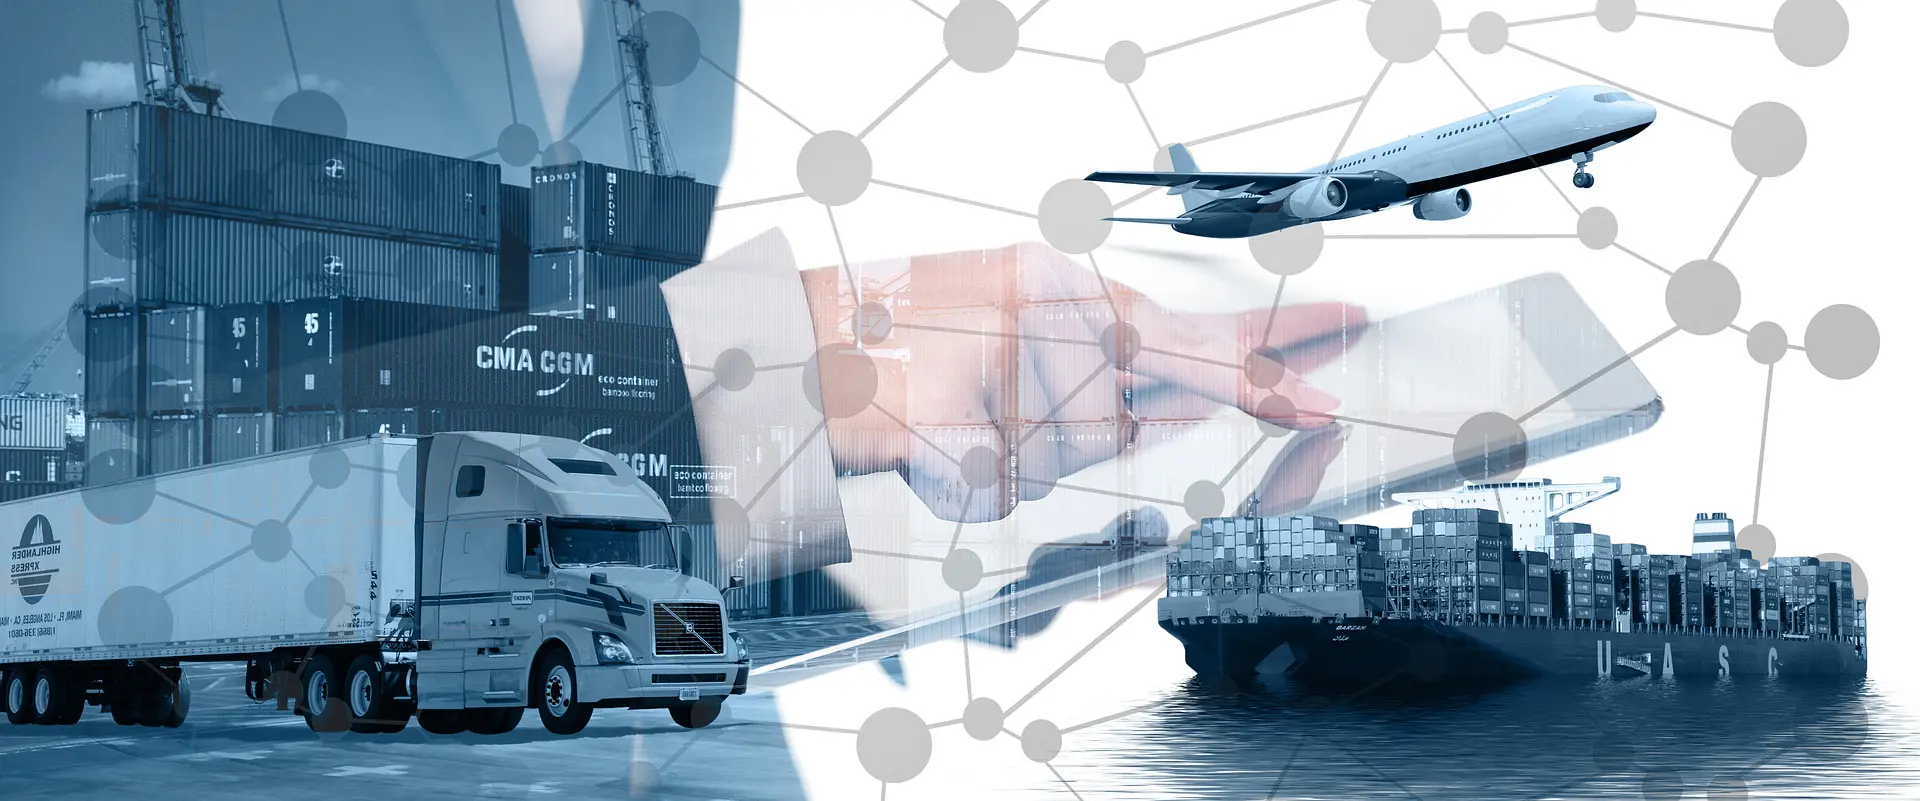 Using Blockchain Technology to Improve Logistics and Supply Chains